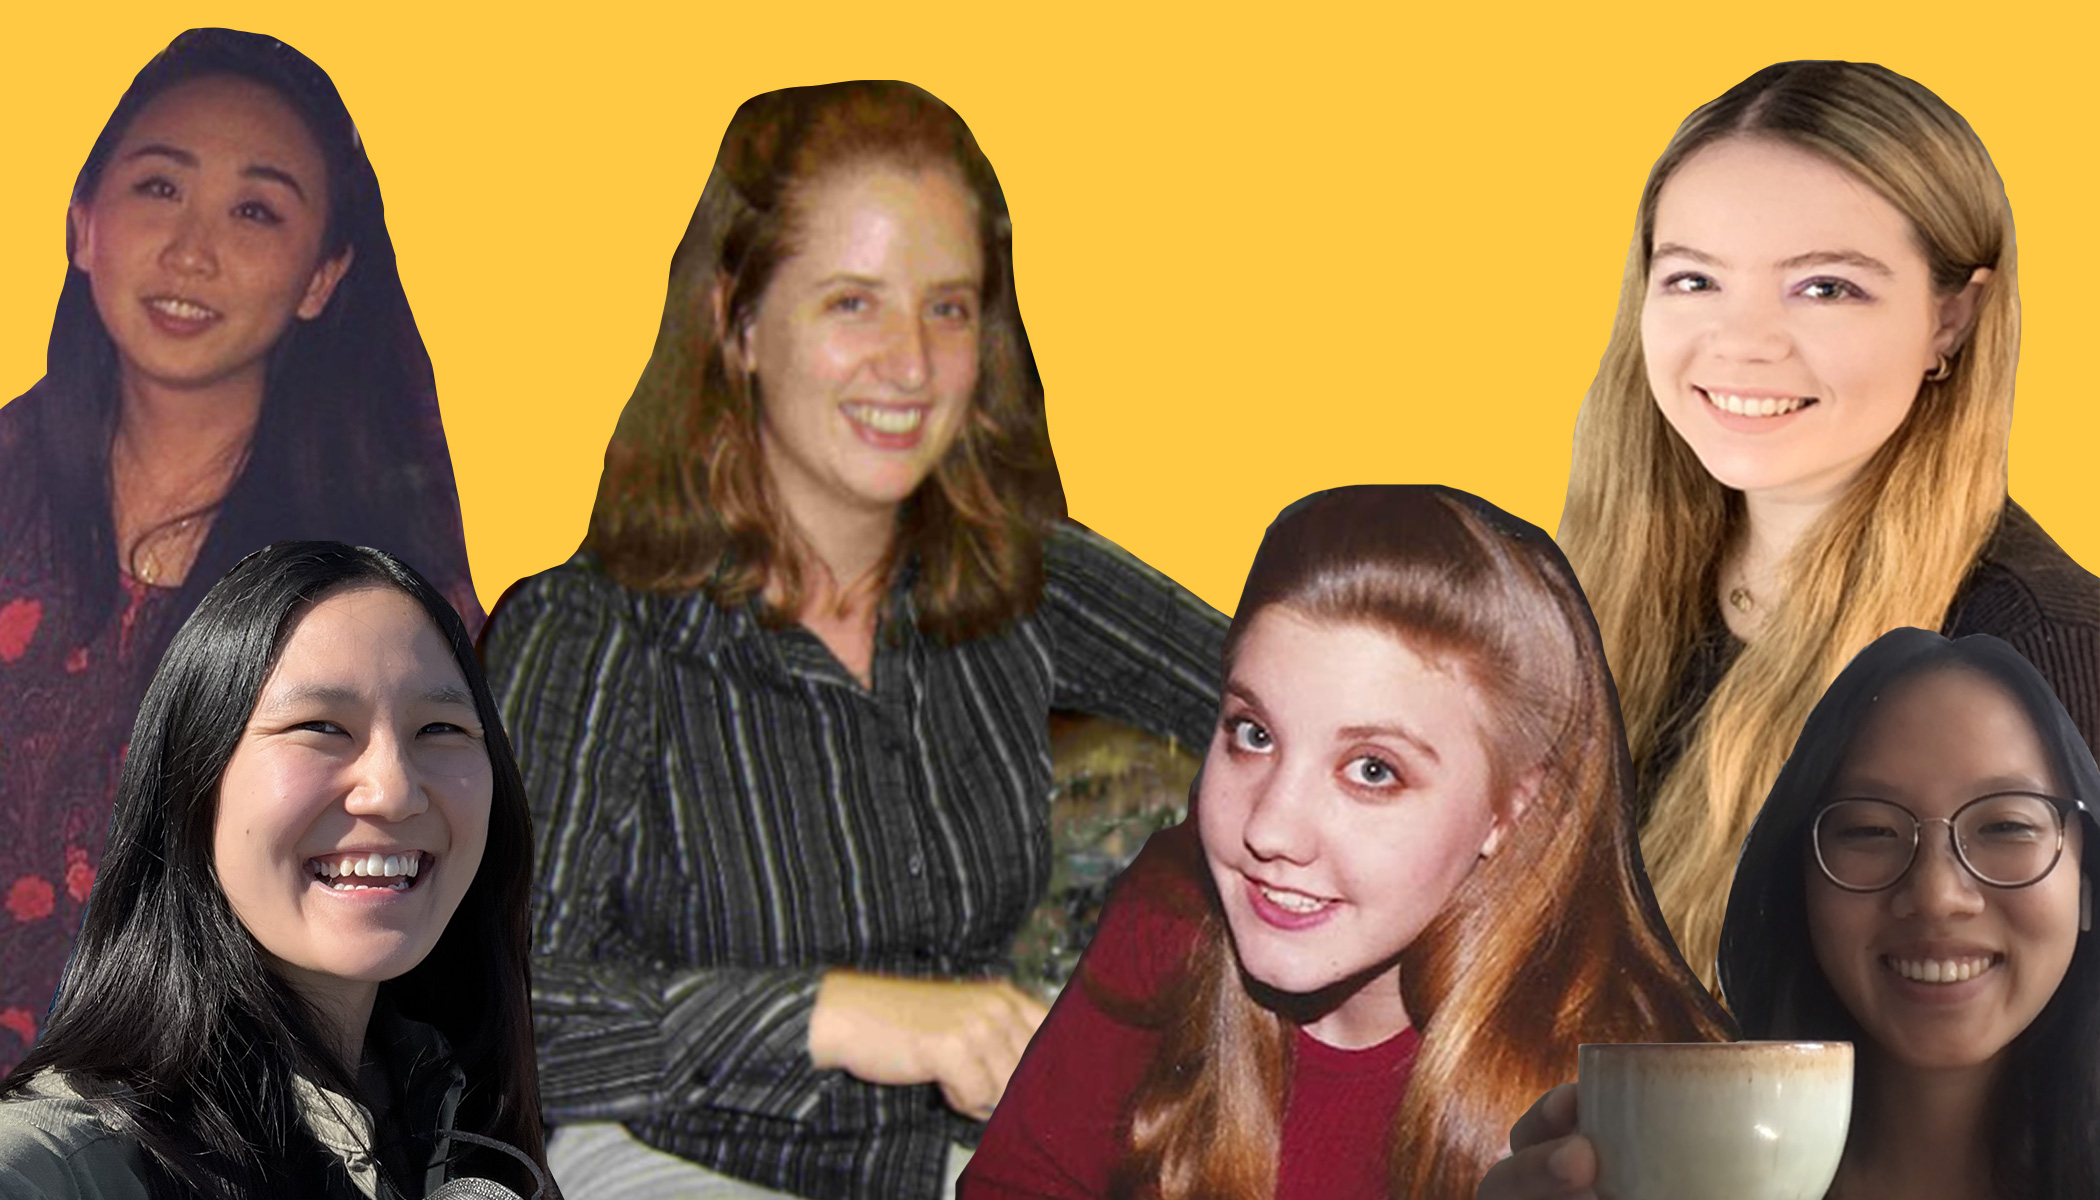 Collage of old and more recent photos of six different women smiling.